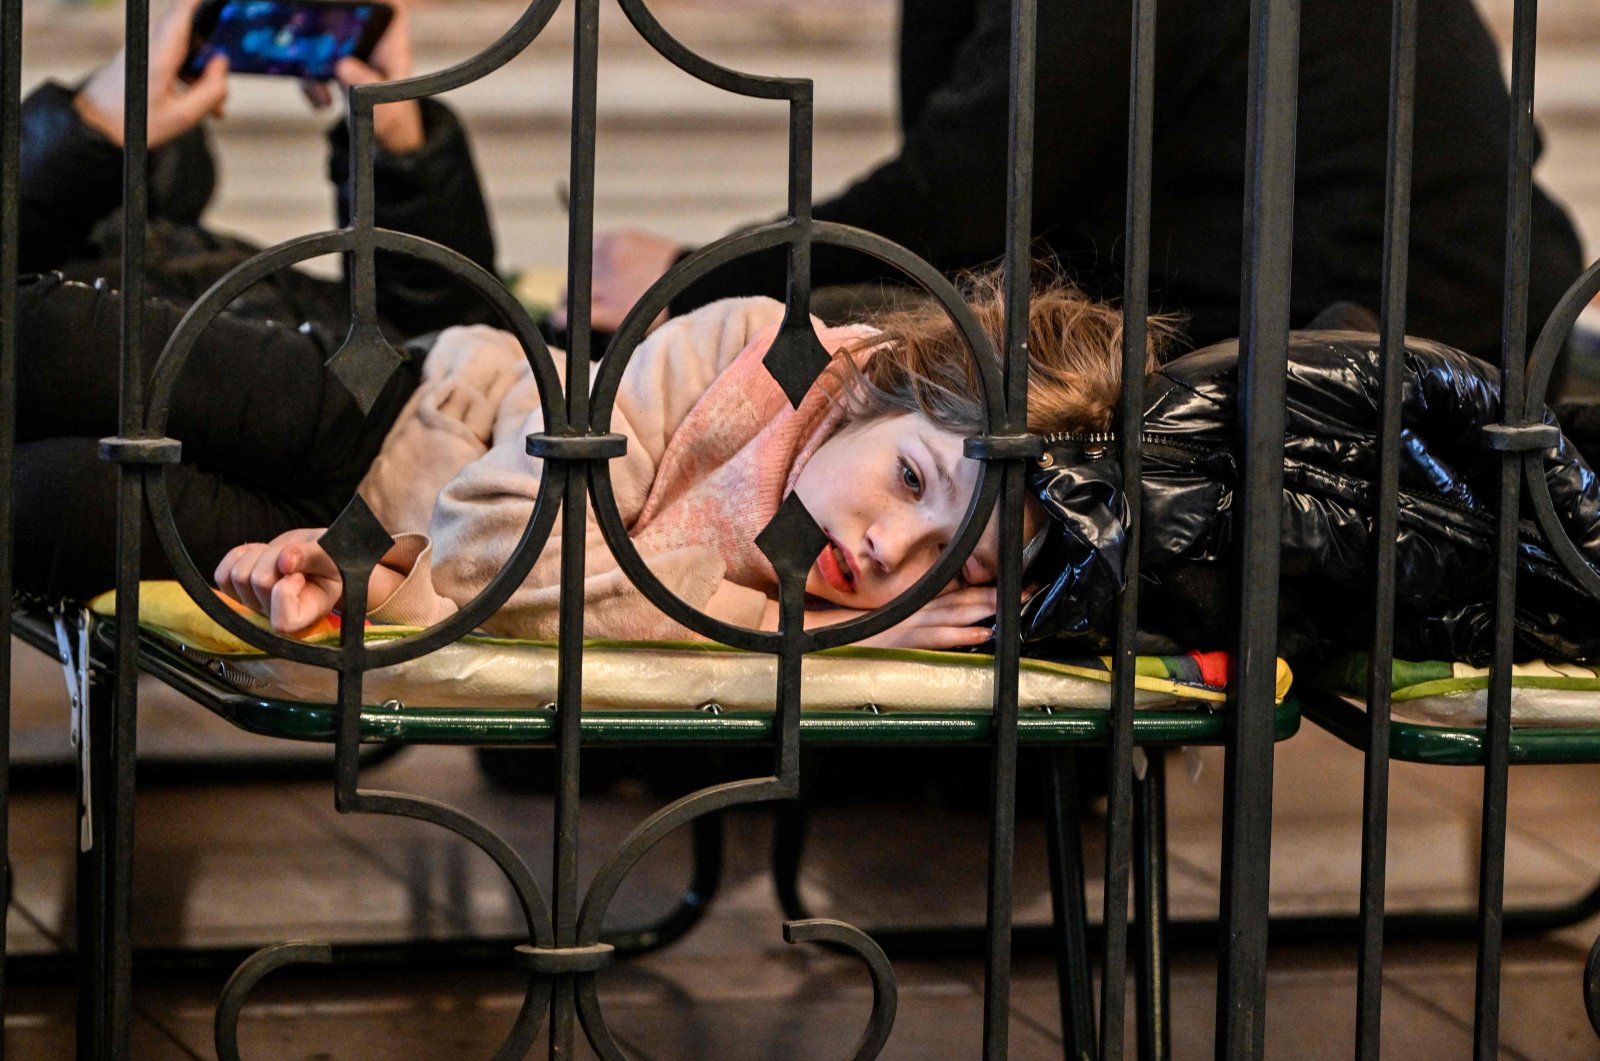 Refugees from Ukraine rest at a temporary shelter in the main train station of Krakow, Poland, March 6, 2022. (AFP Photo)